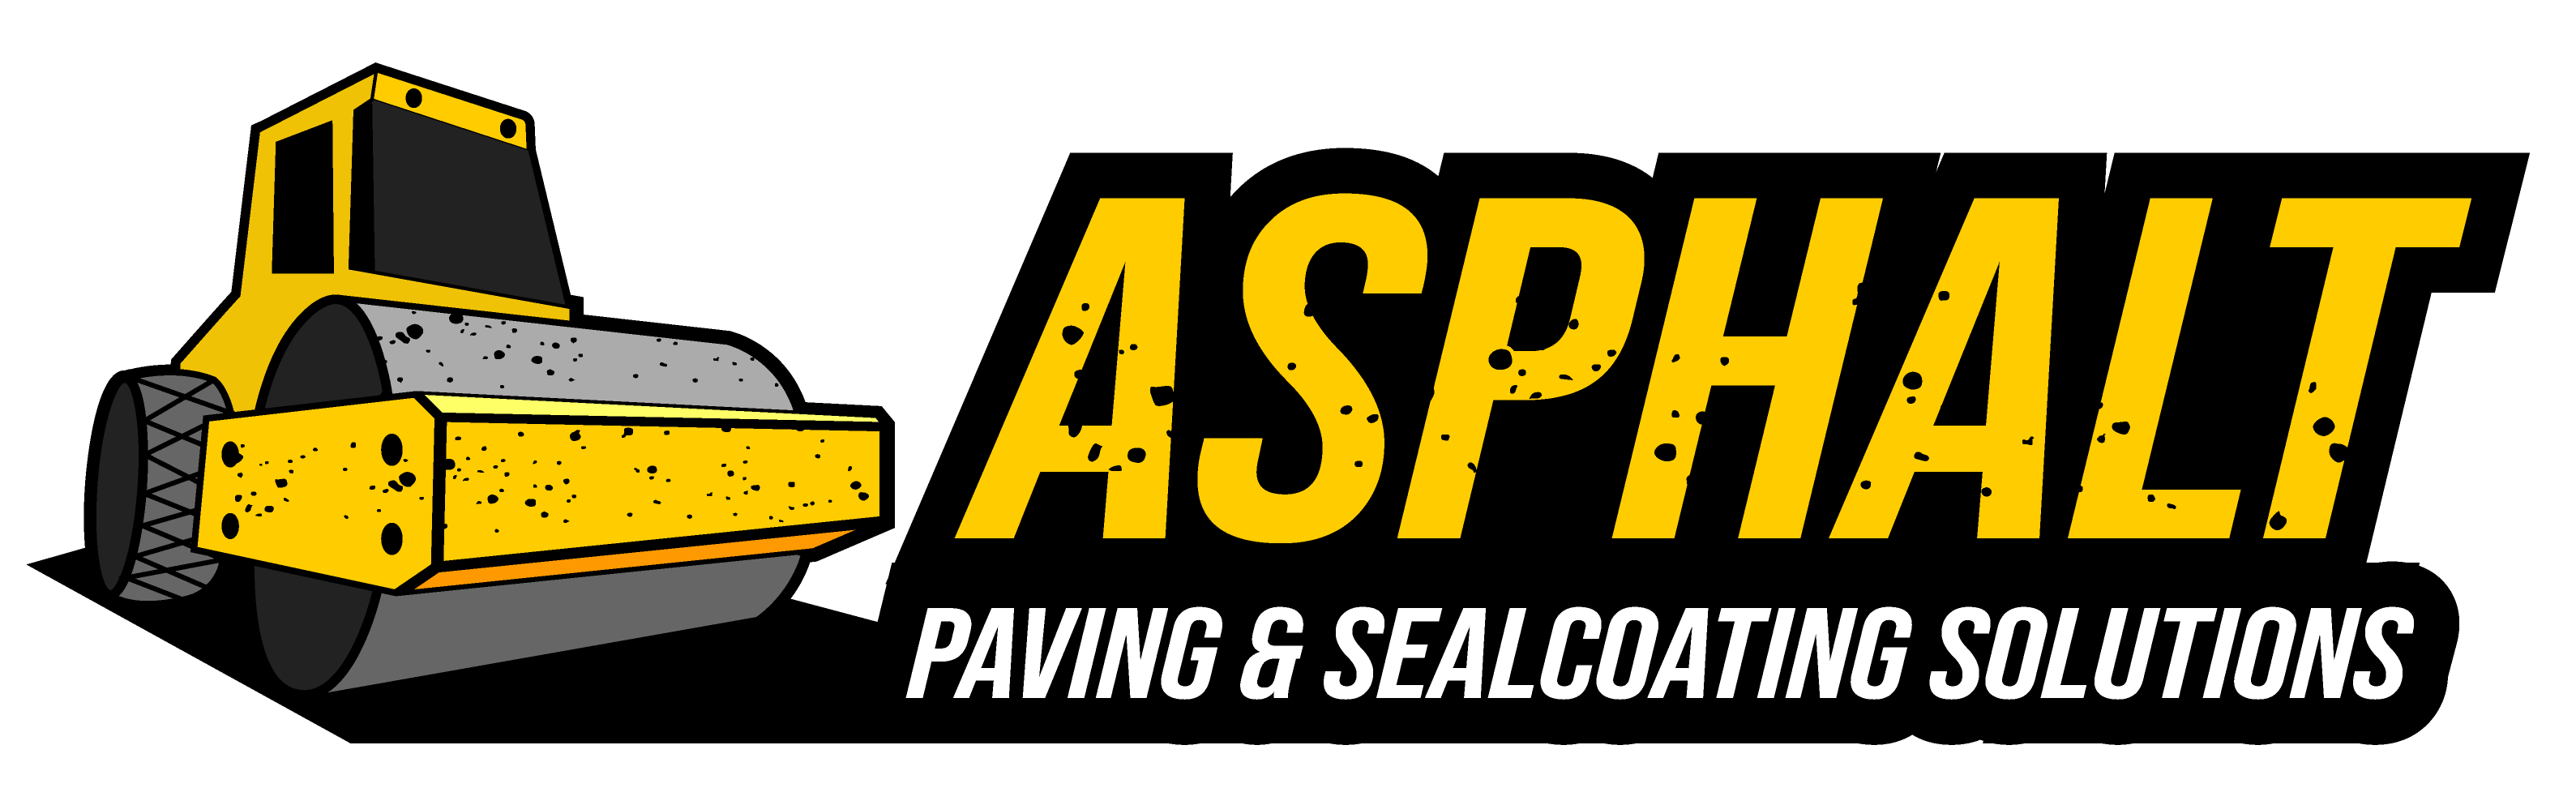 Asphalt Paving & Sealcoating Solutions Offers Paving and Asphalt Services in 48 States Across the United States